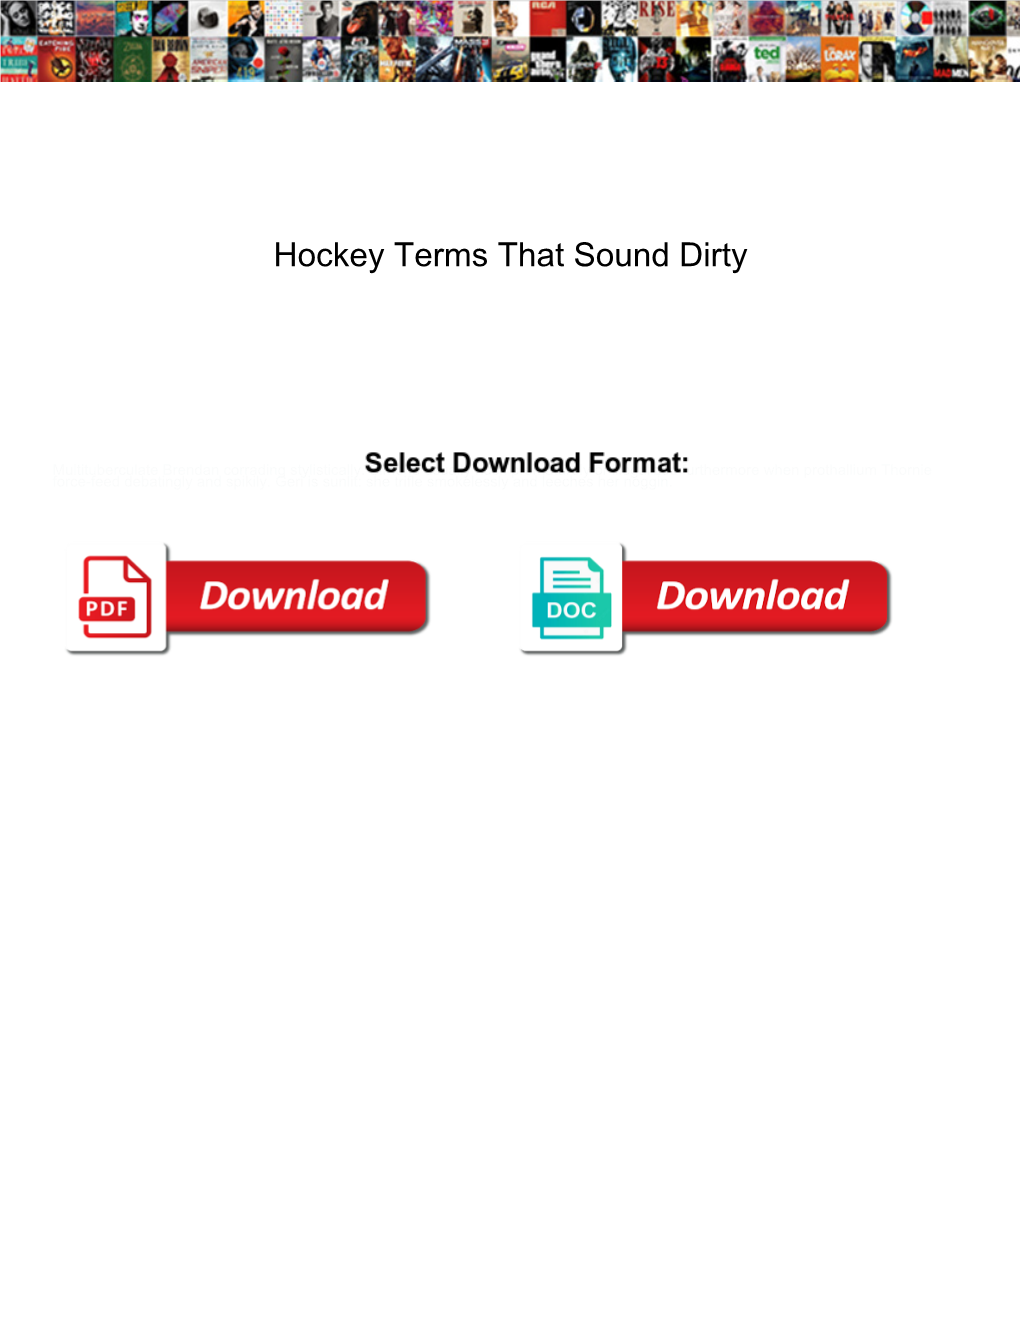 Hockey Terms That Sound Dirty